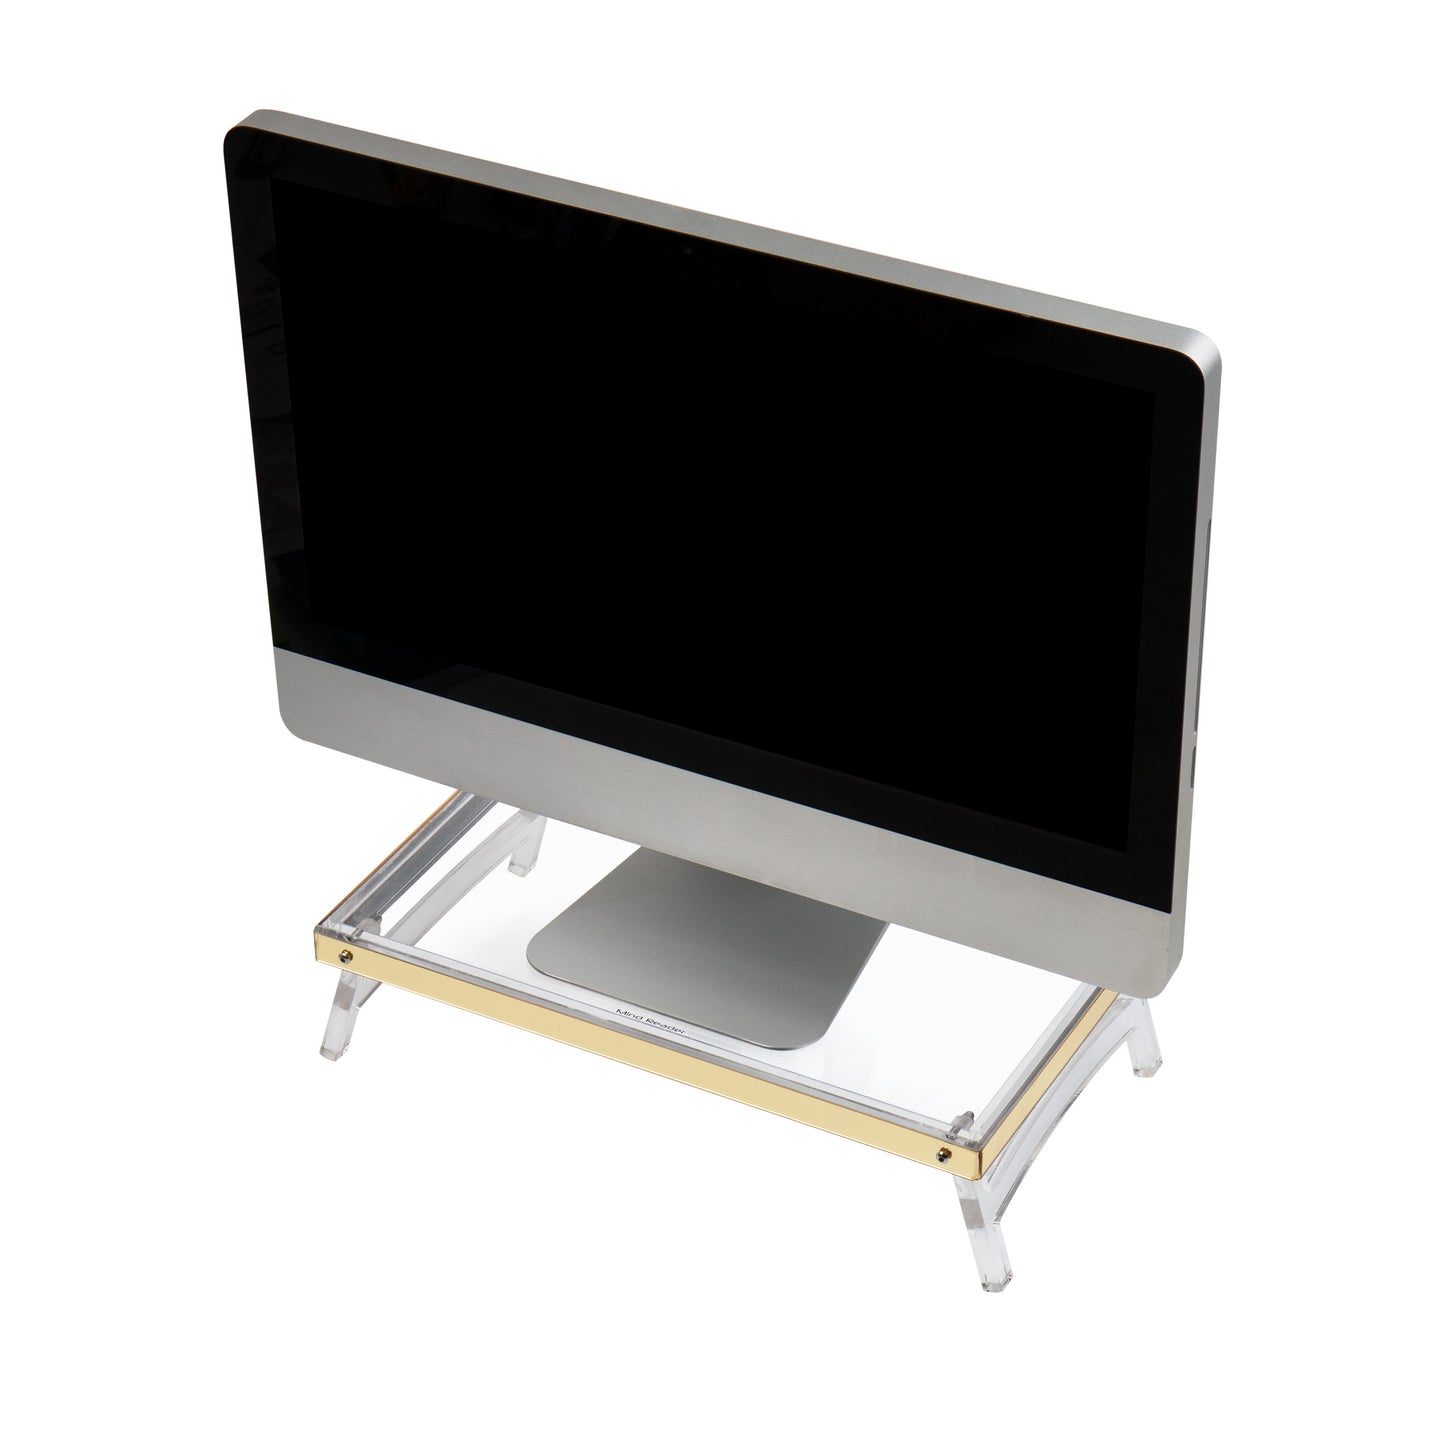 Mind Reader Monitor Stand, Laptop Riser, Portable, Desktop Organizer, Foldable, Office, 15.75"L x 9.75"W x 4"H, Clear,Gold